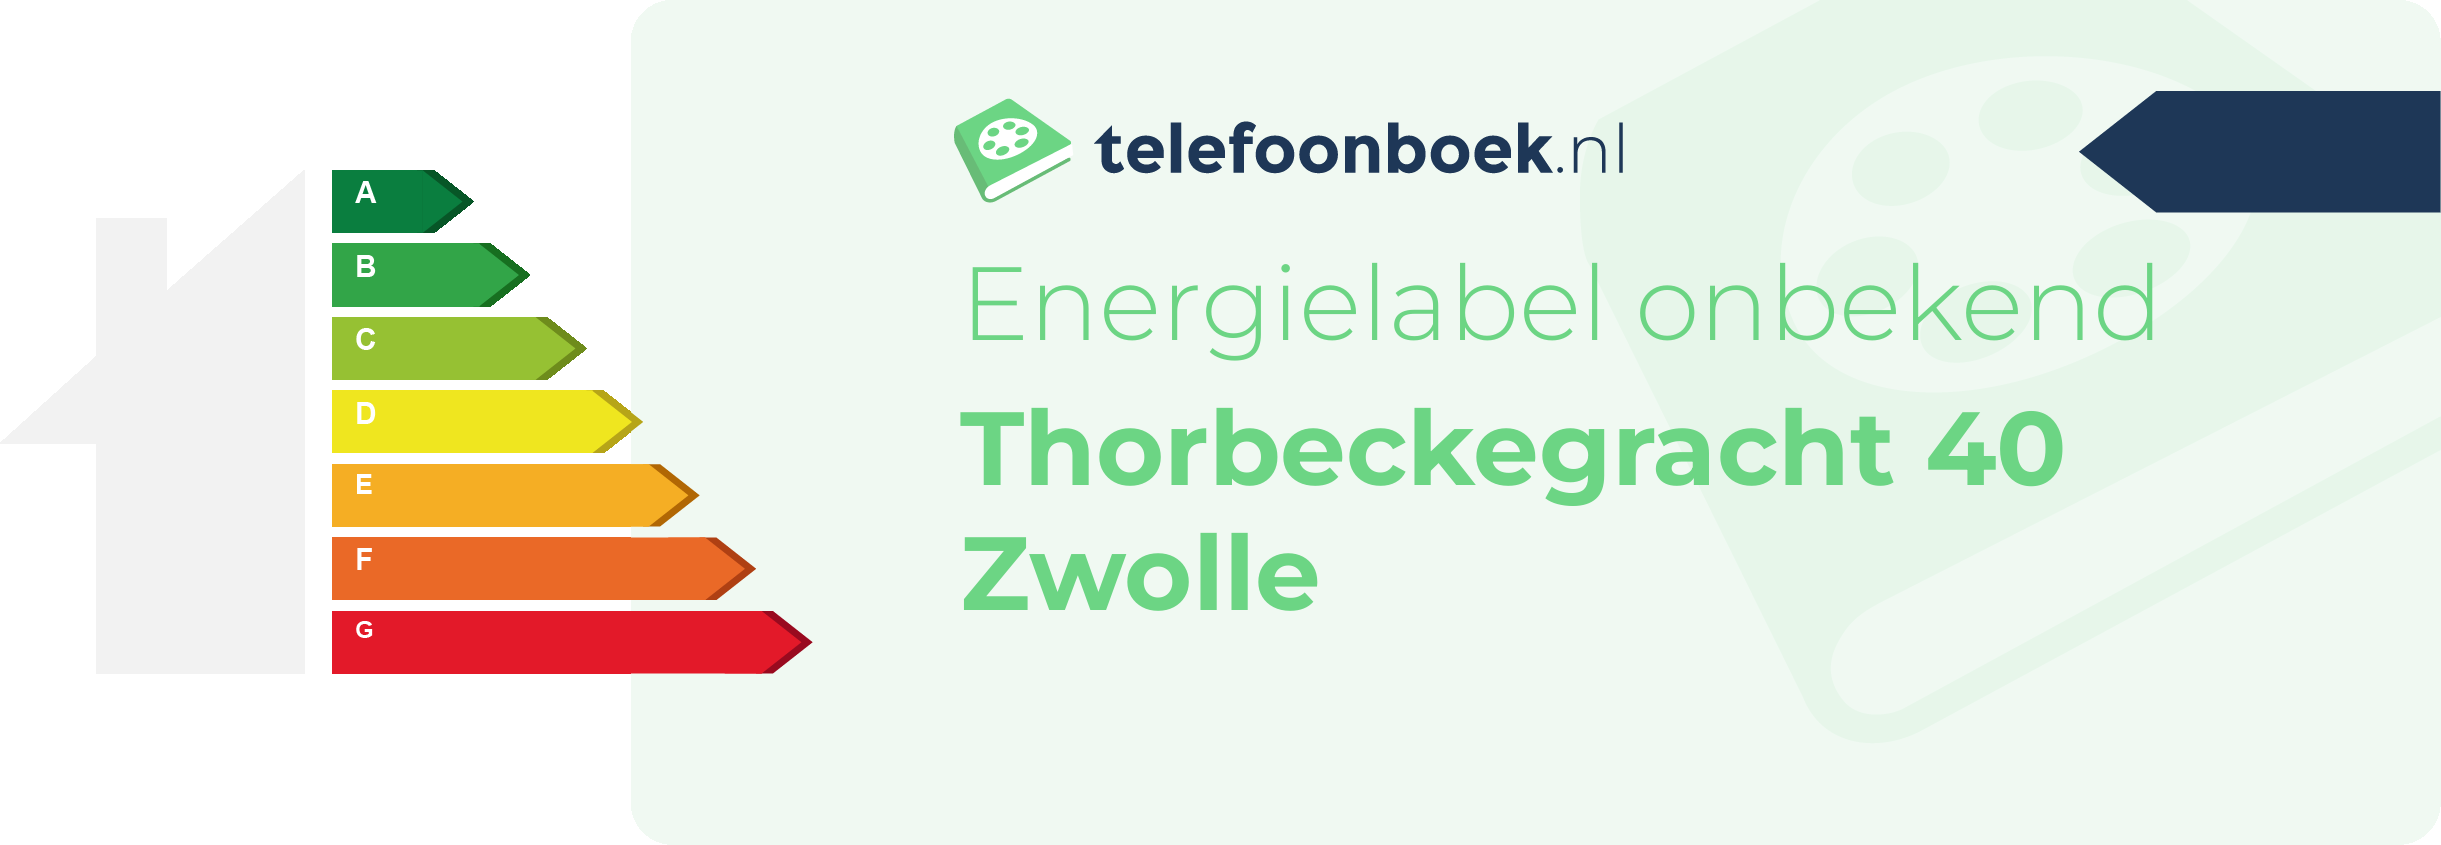 Energielabel Thorbeckegracht 40 Zwolle